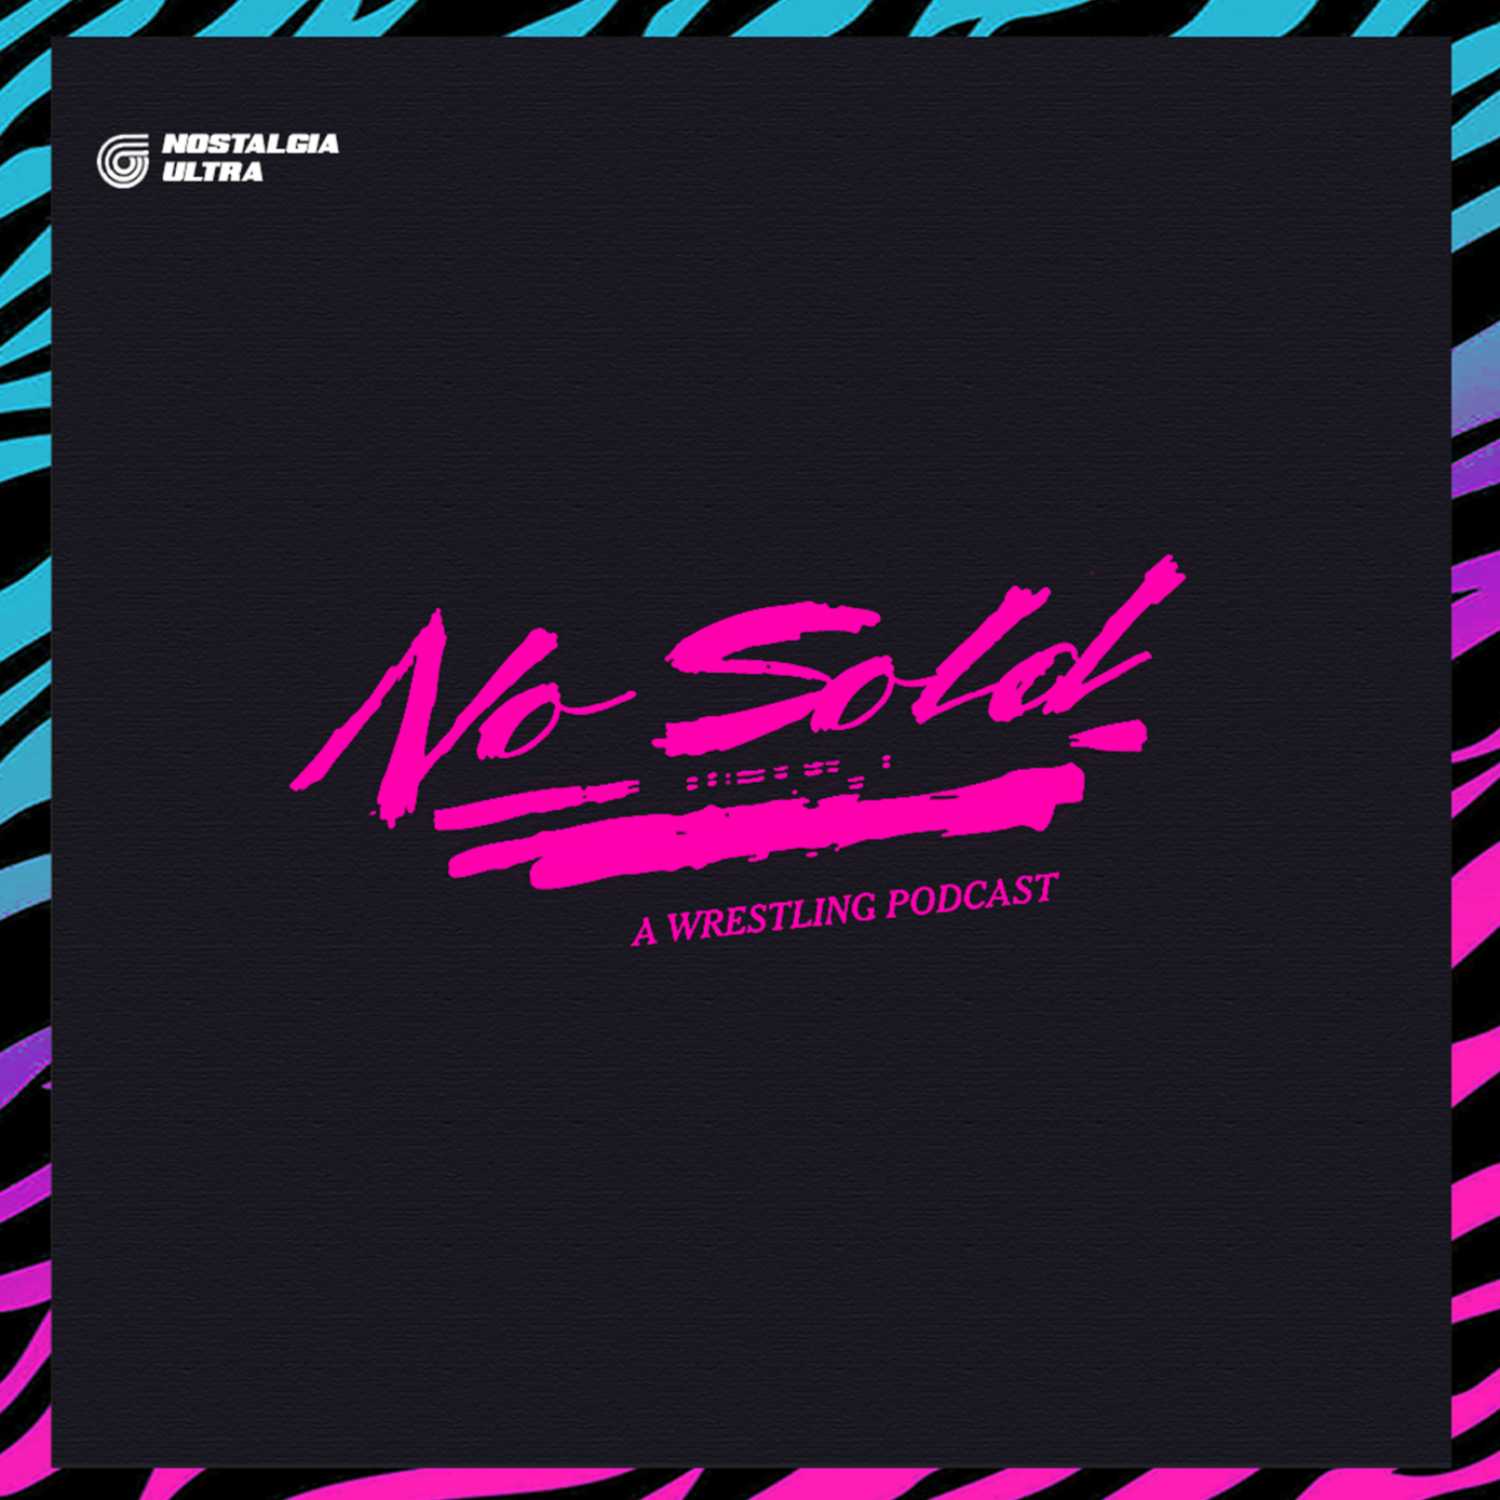 No Sold: A Wrestling Podcast